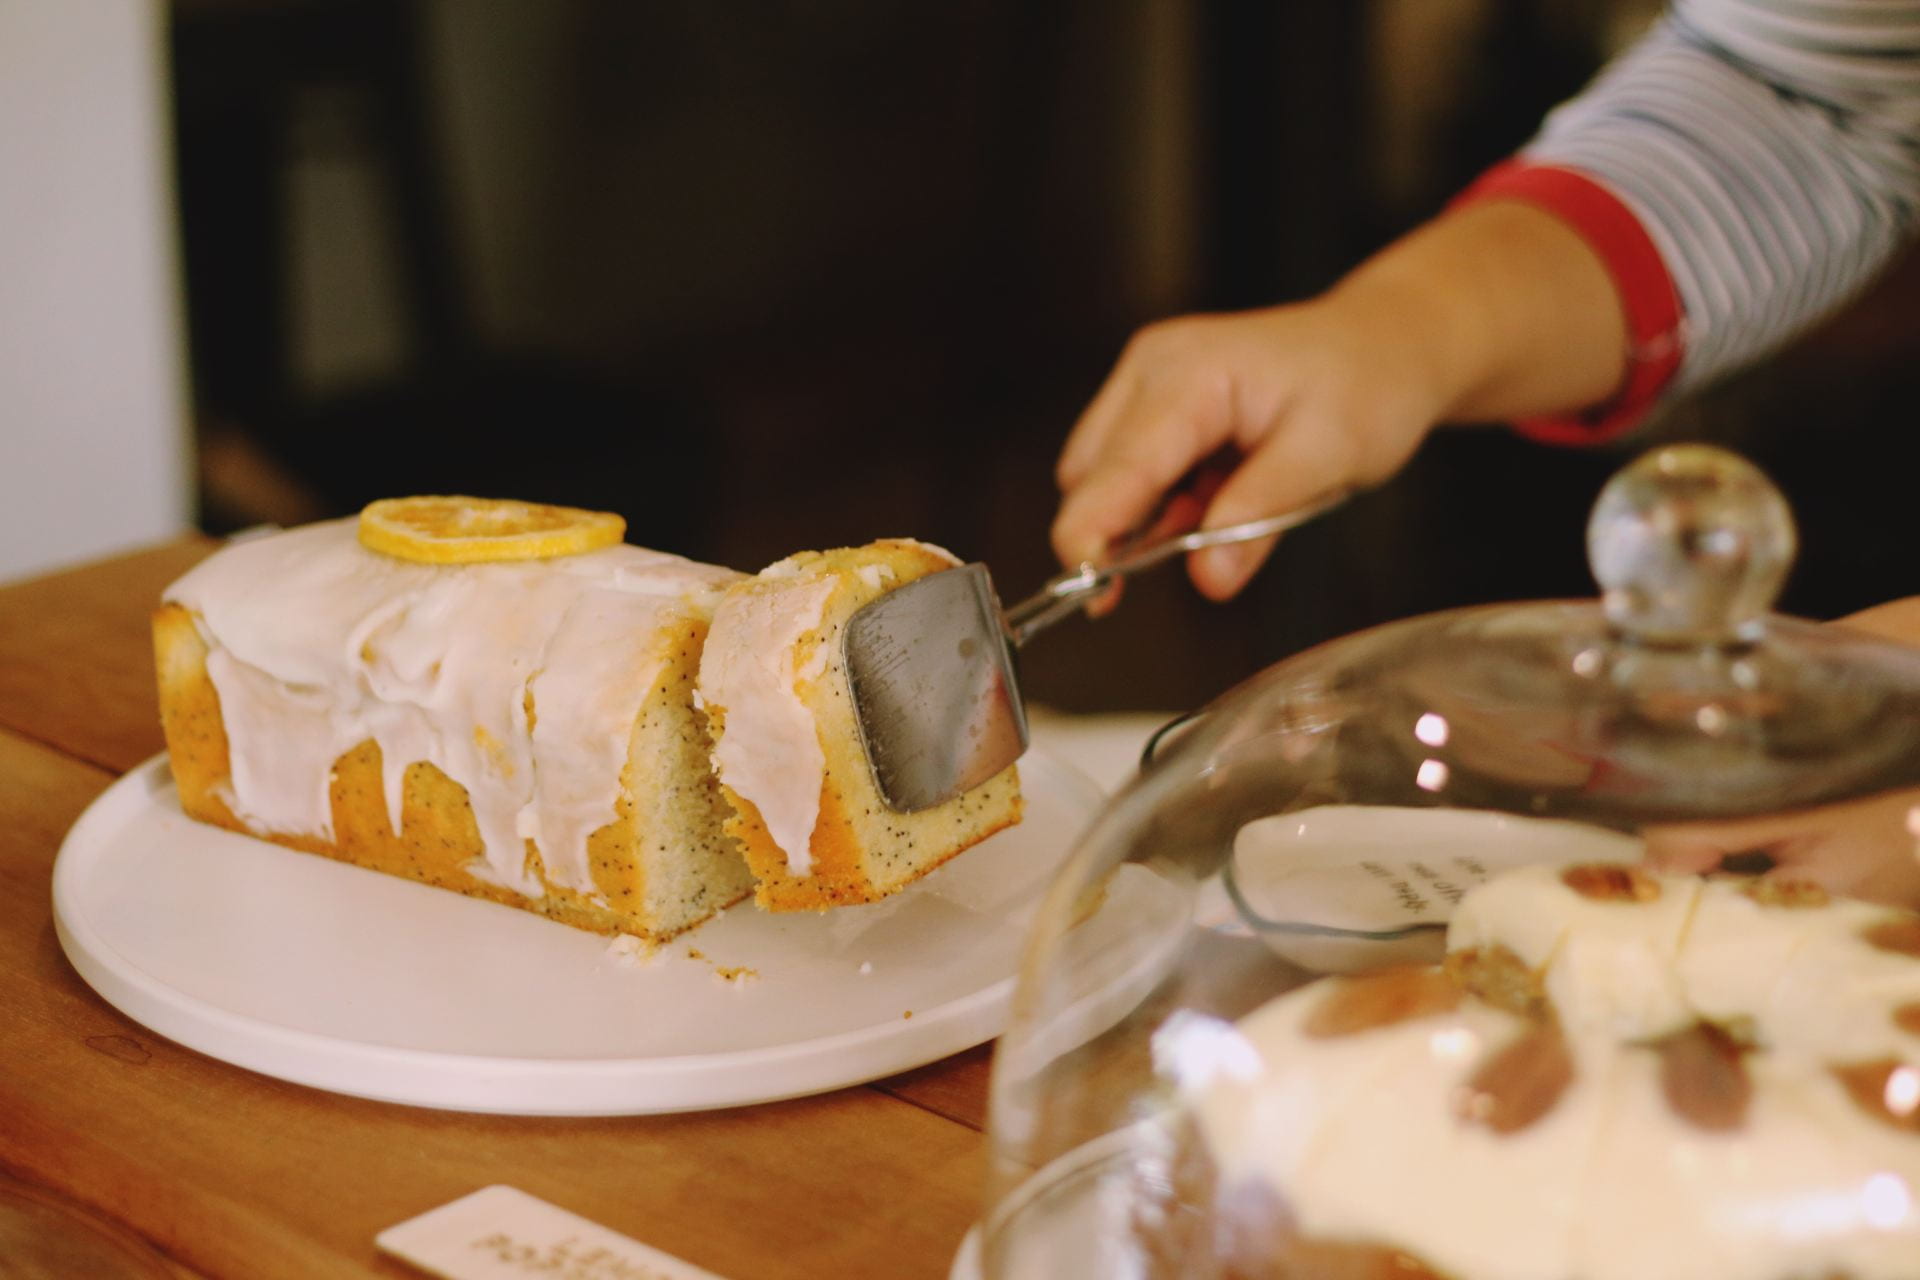 A person picking up a slice of lemon cake